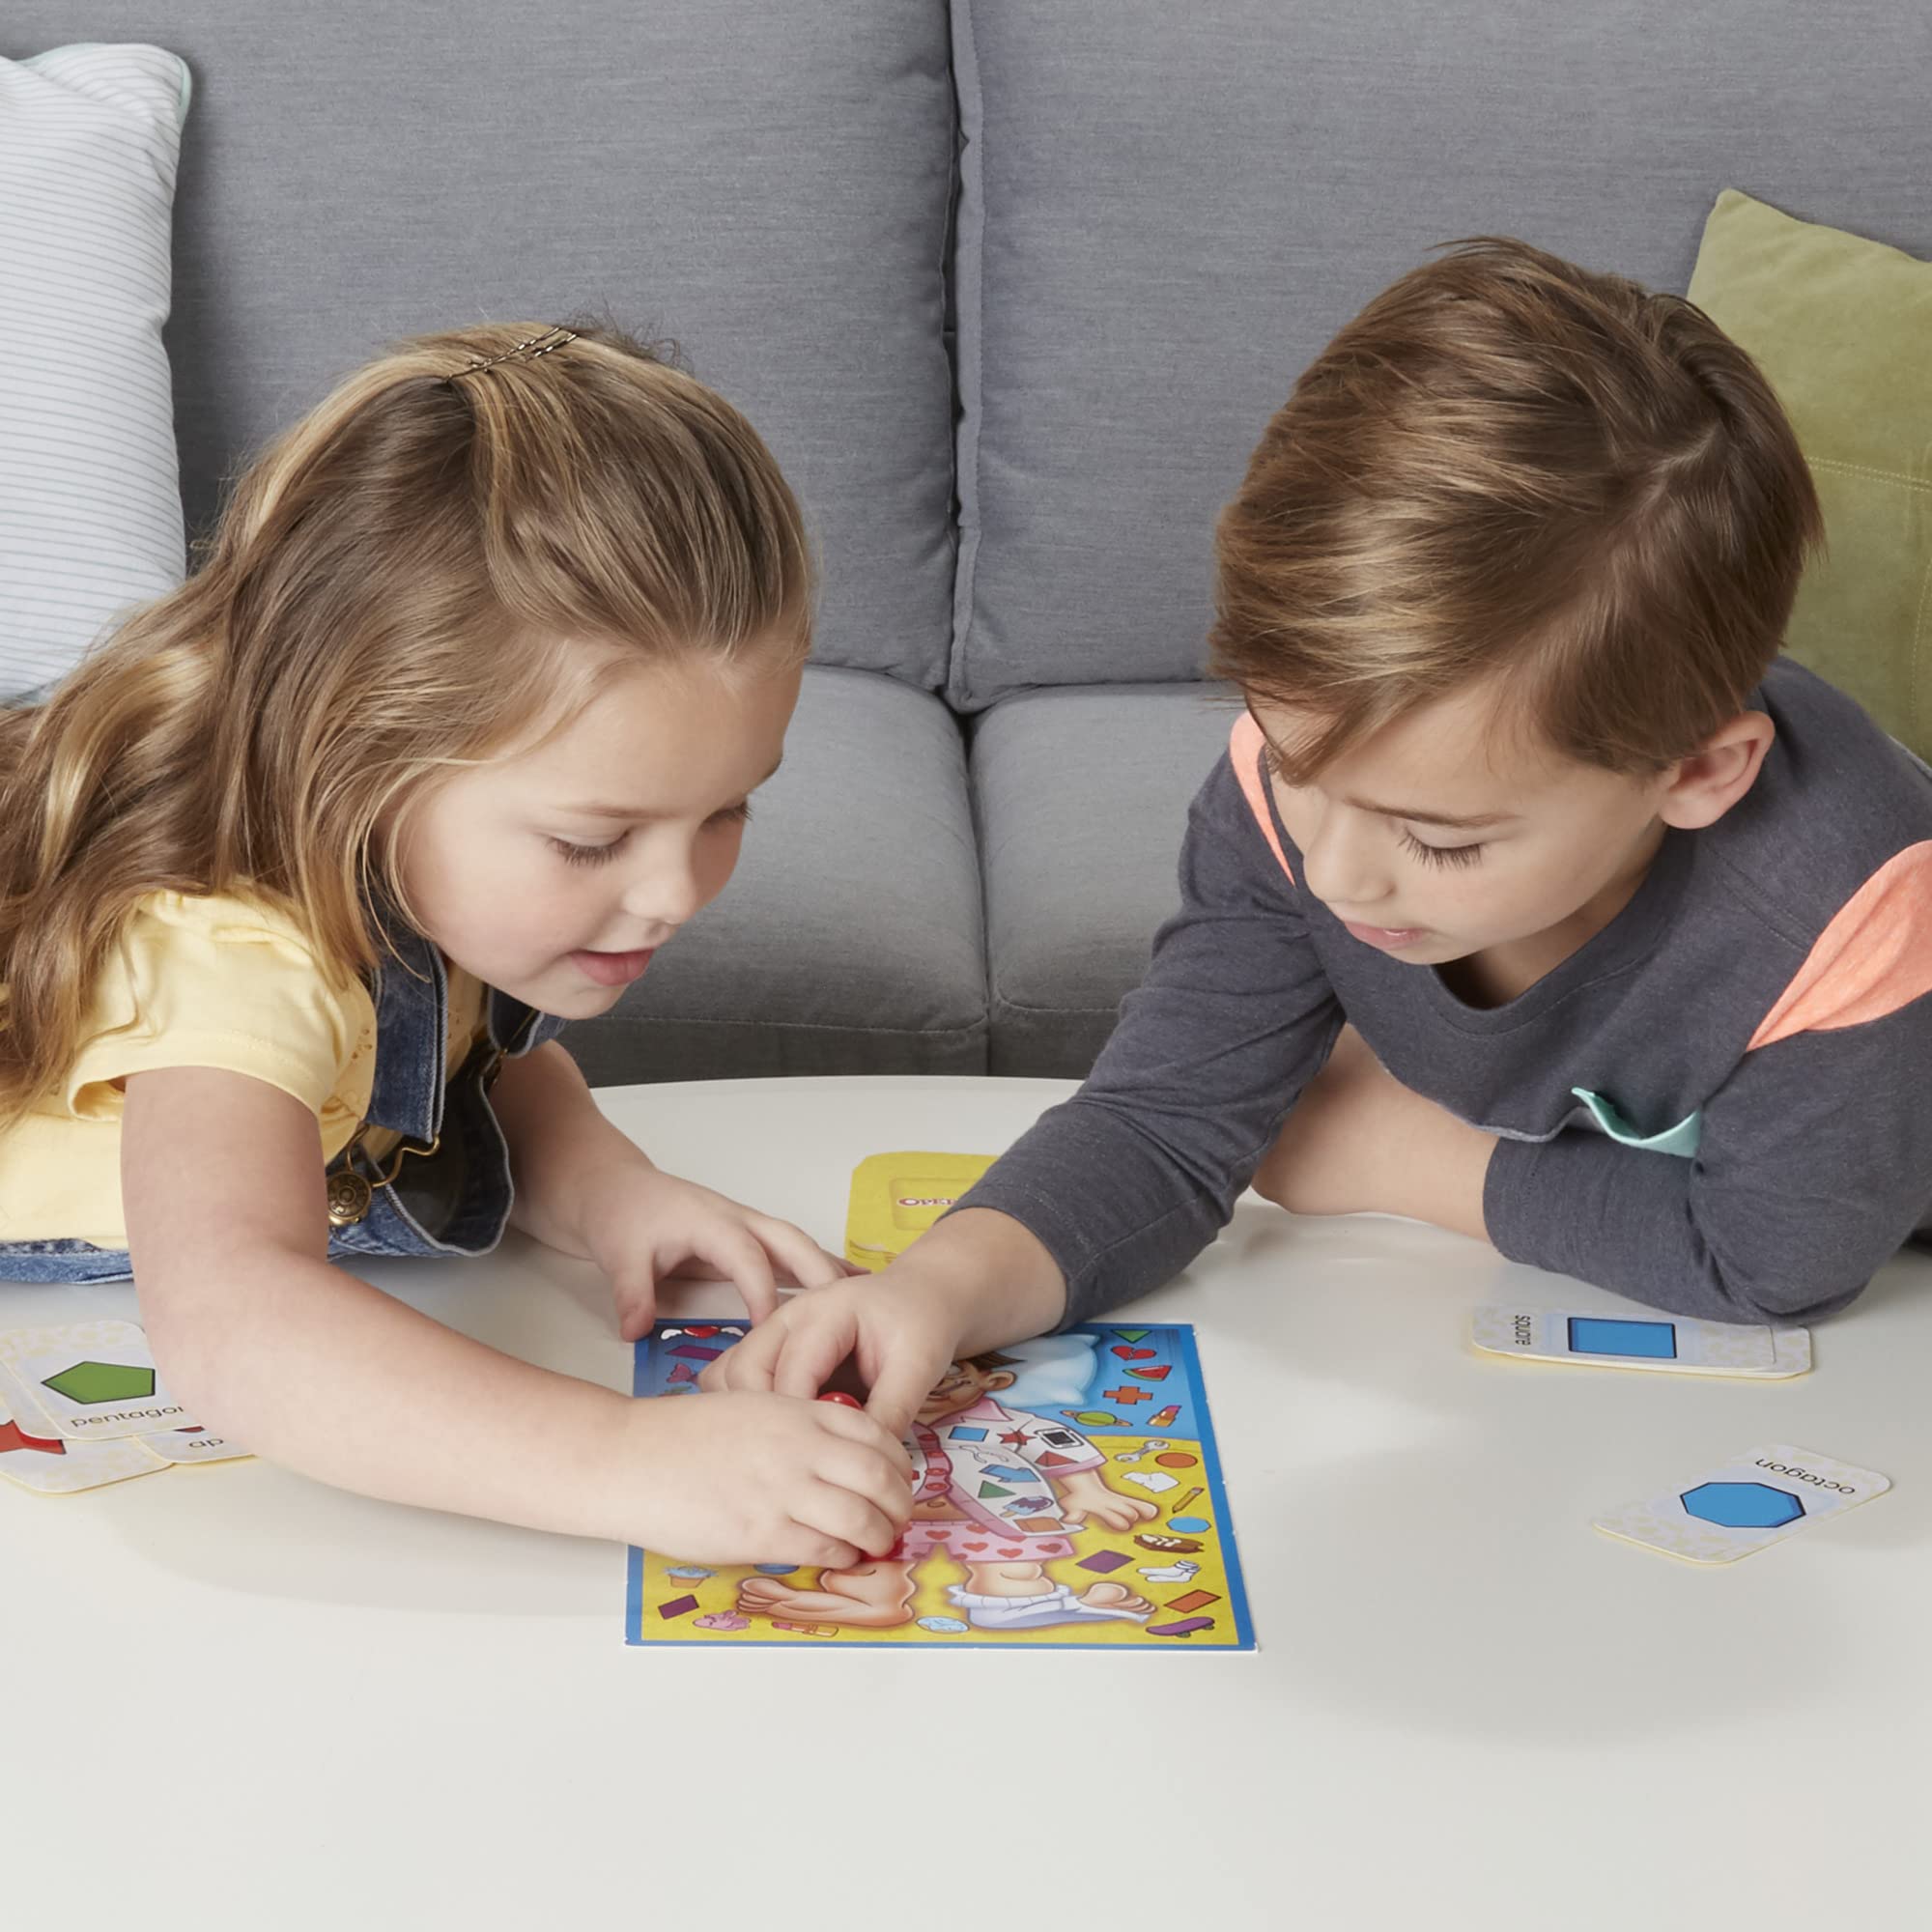 Hasbro Gaming Operation Junior Board Game for Preschoolers and Kids Ages 3 and Up, Operation Game for Younger Kids, Preschool Games, Kids Games